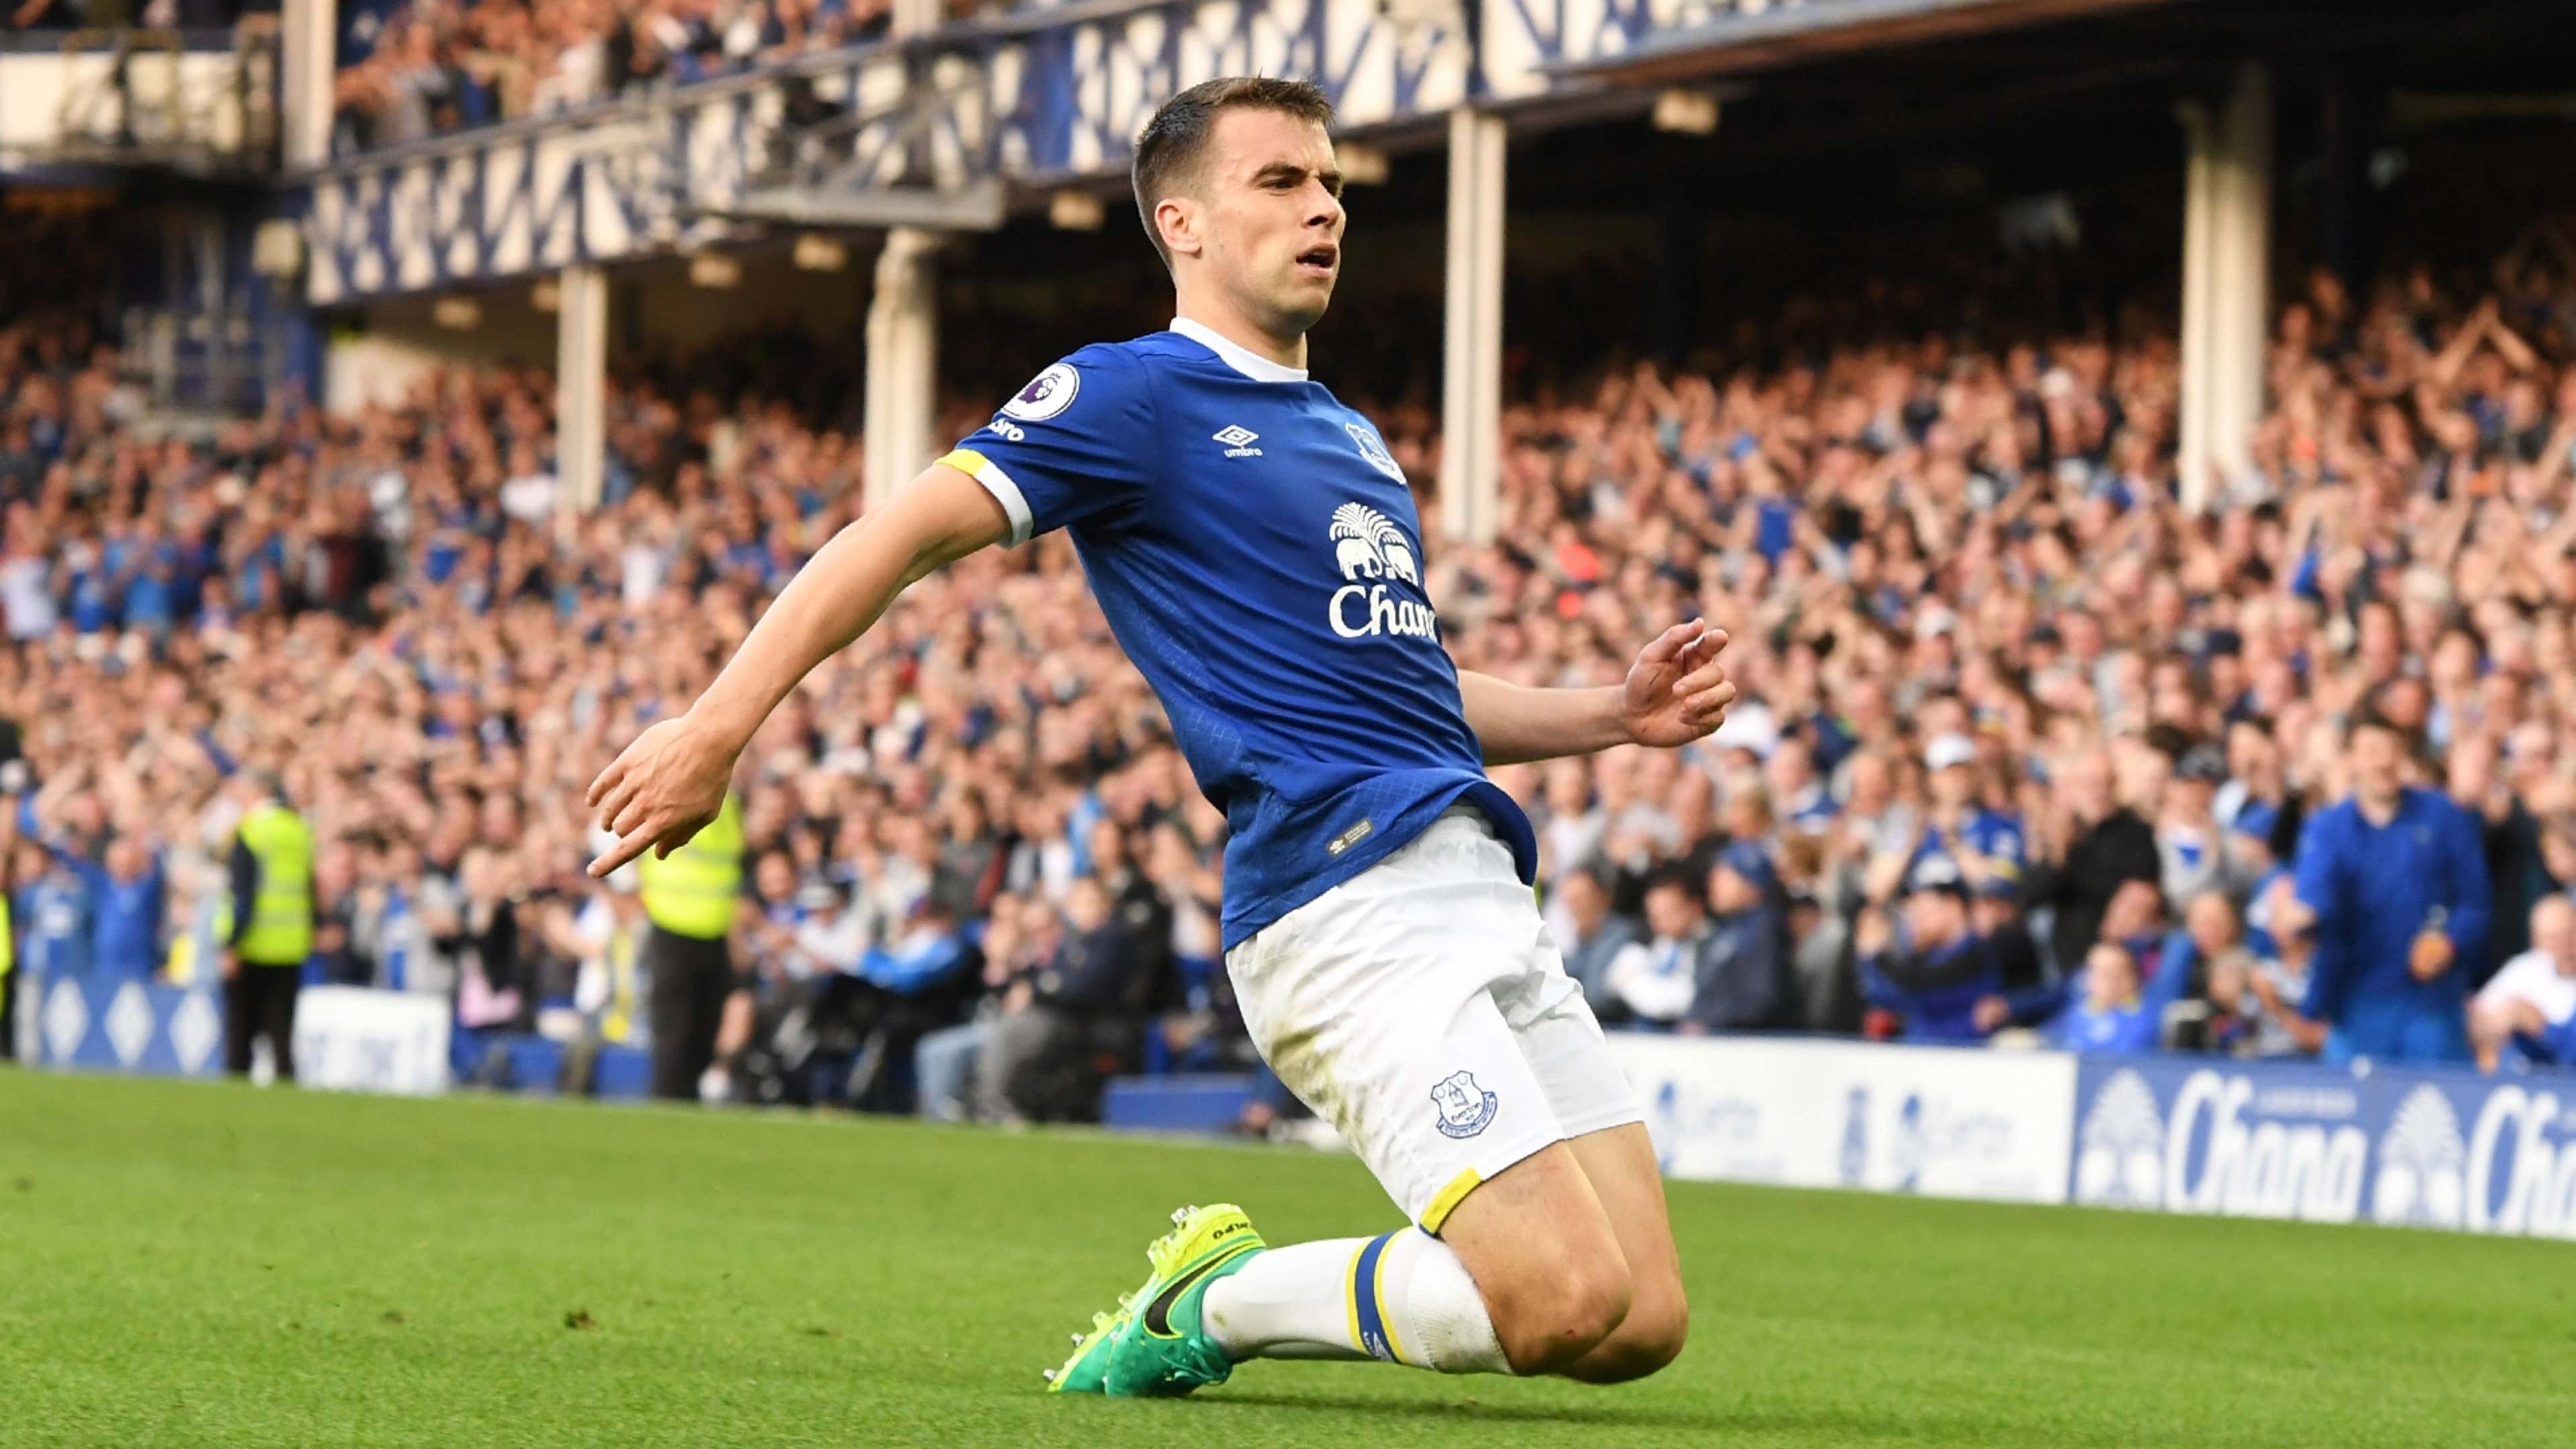 Louis Vuitton wash bags are everything that is wrong with football – Seamus  Coleman